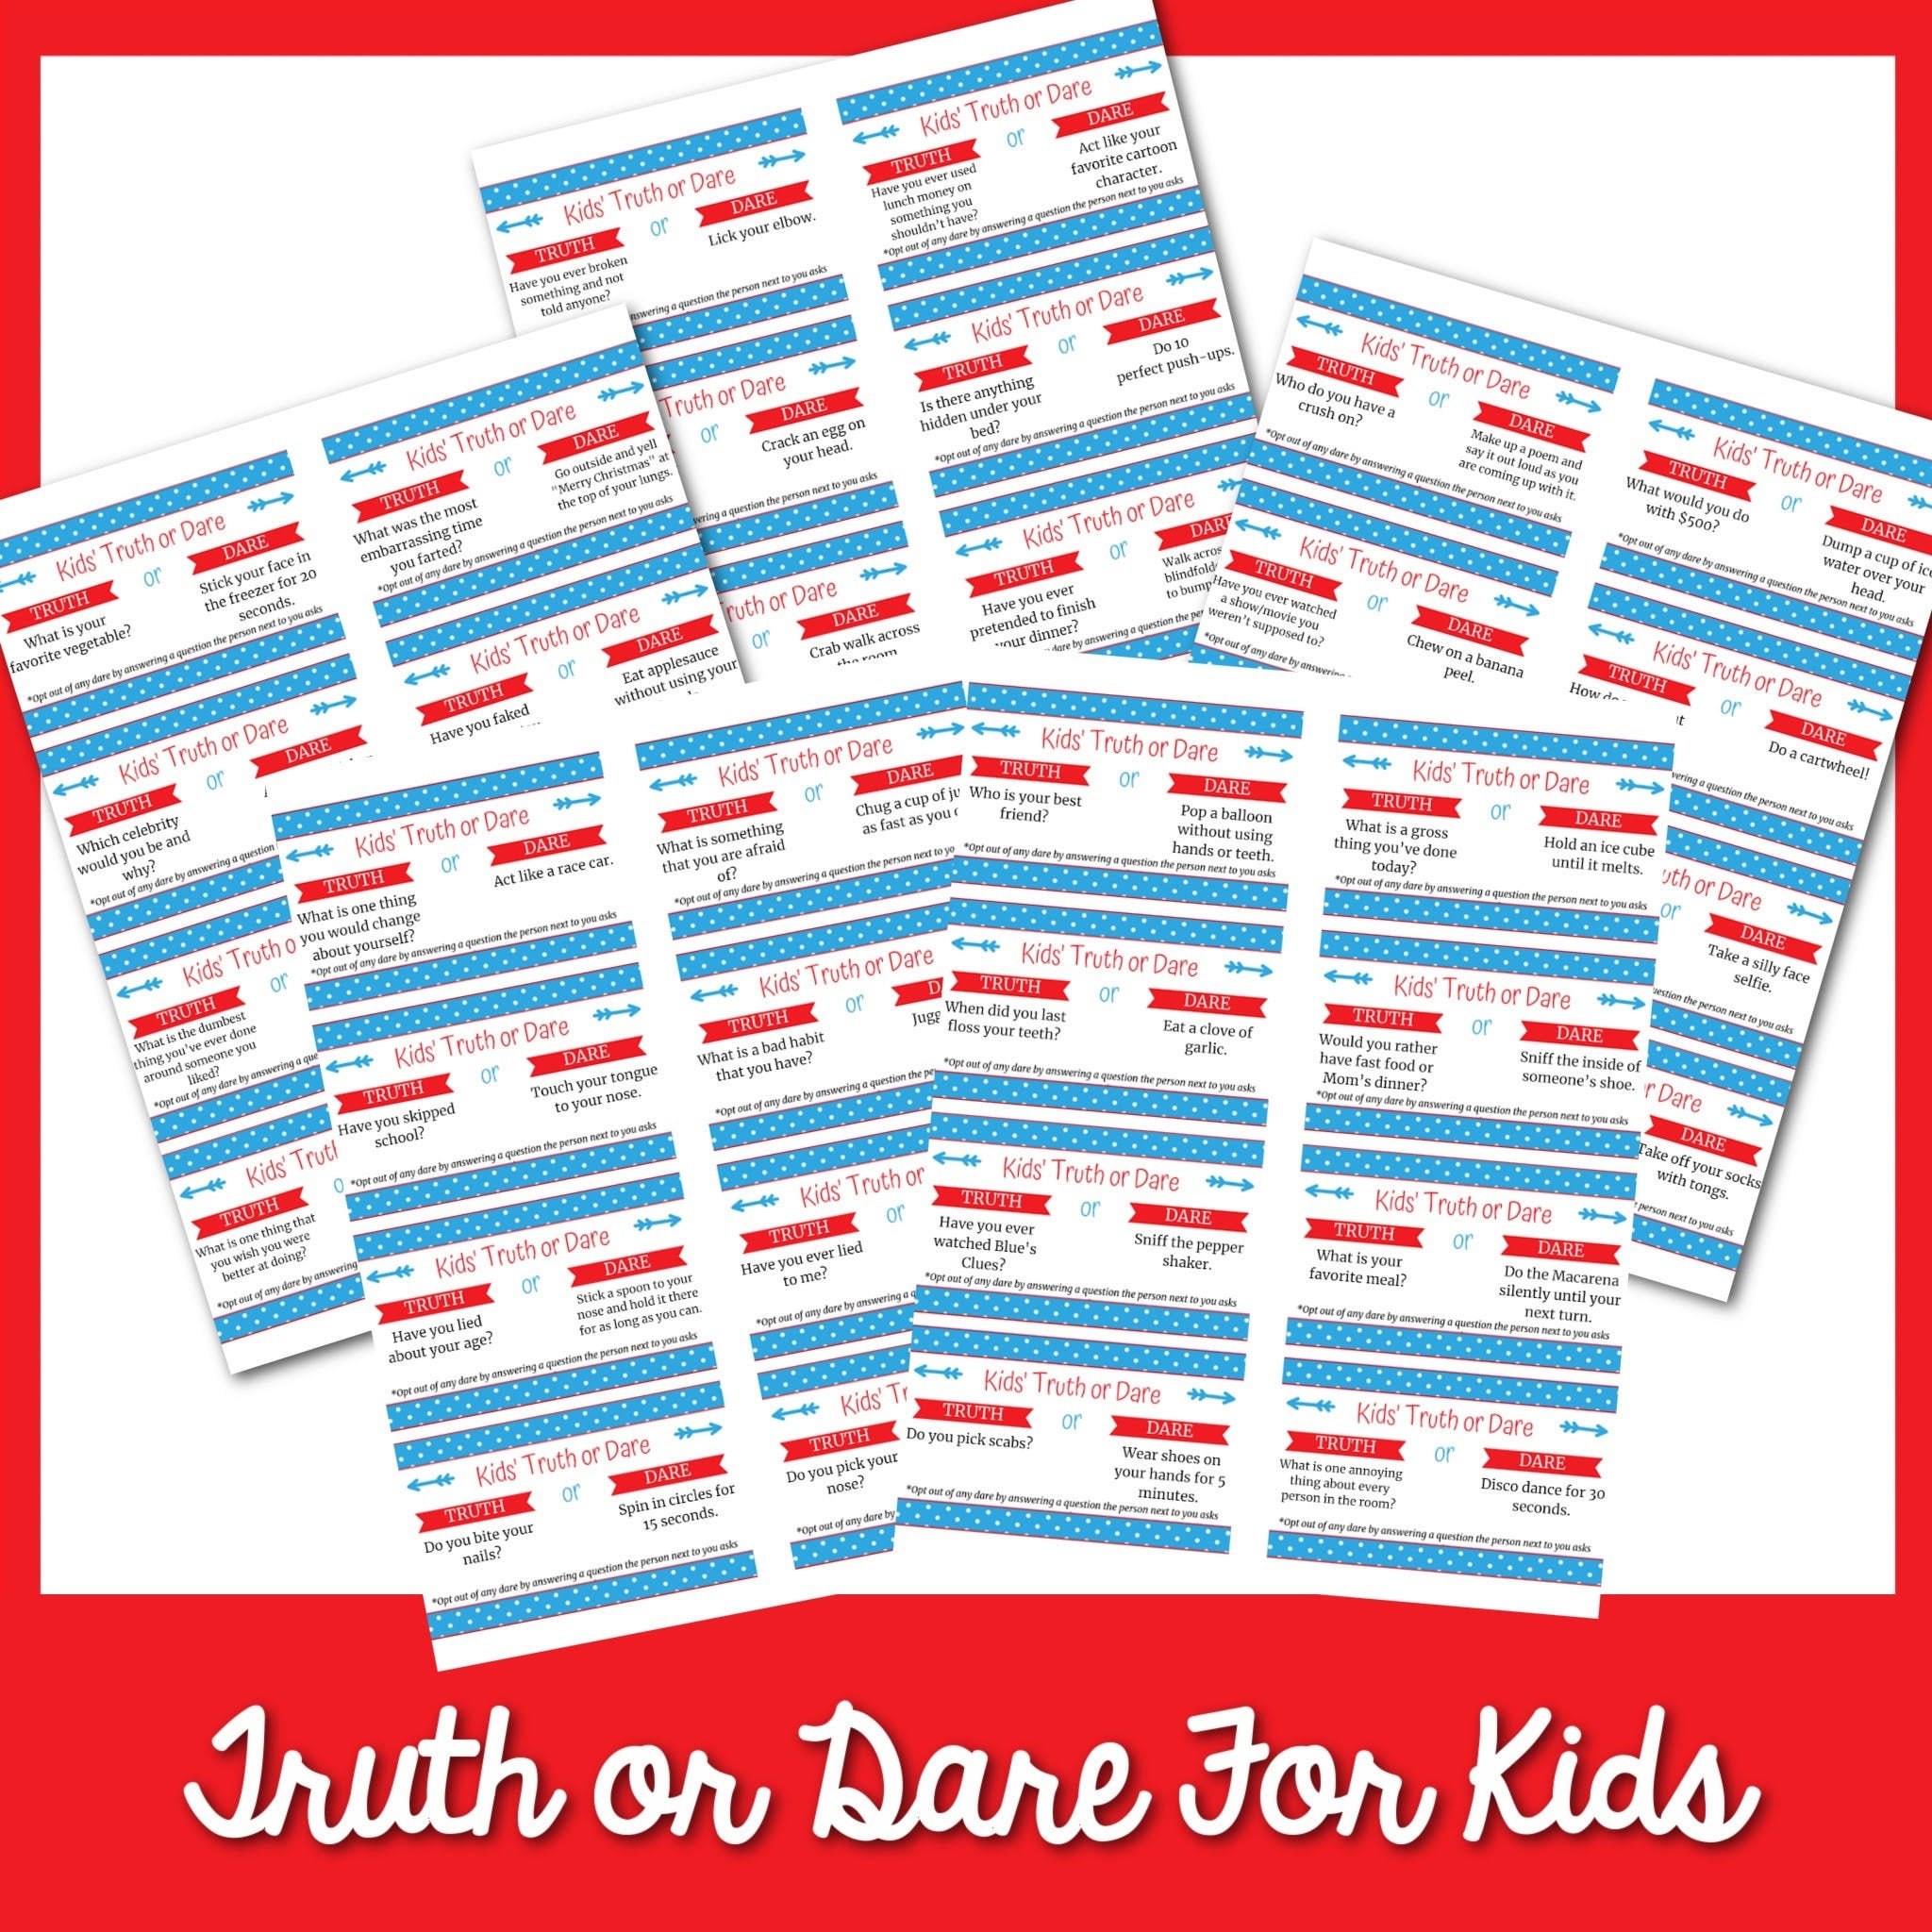 For dare kids or truth 100 Great